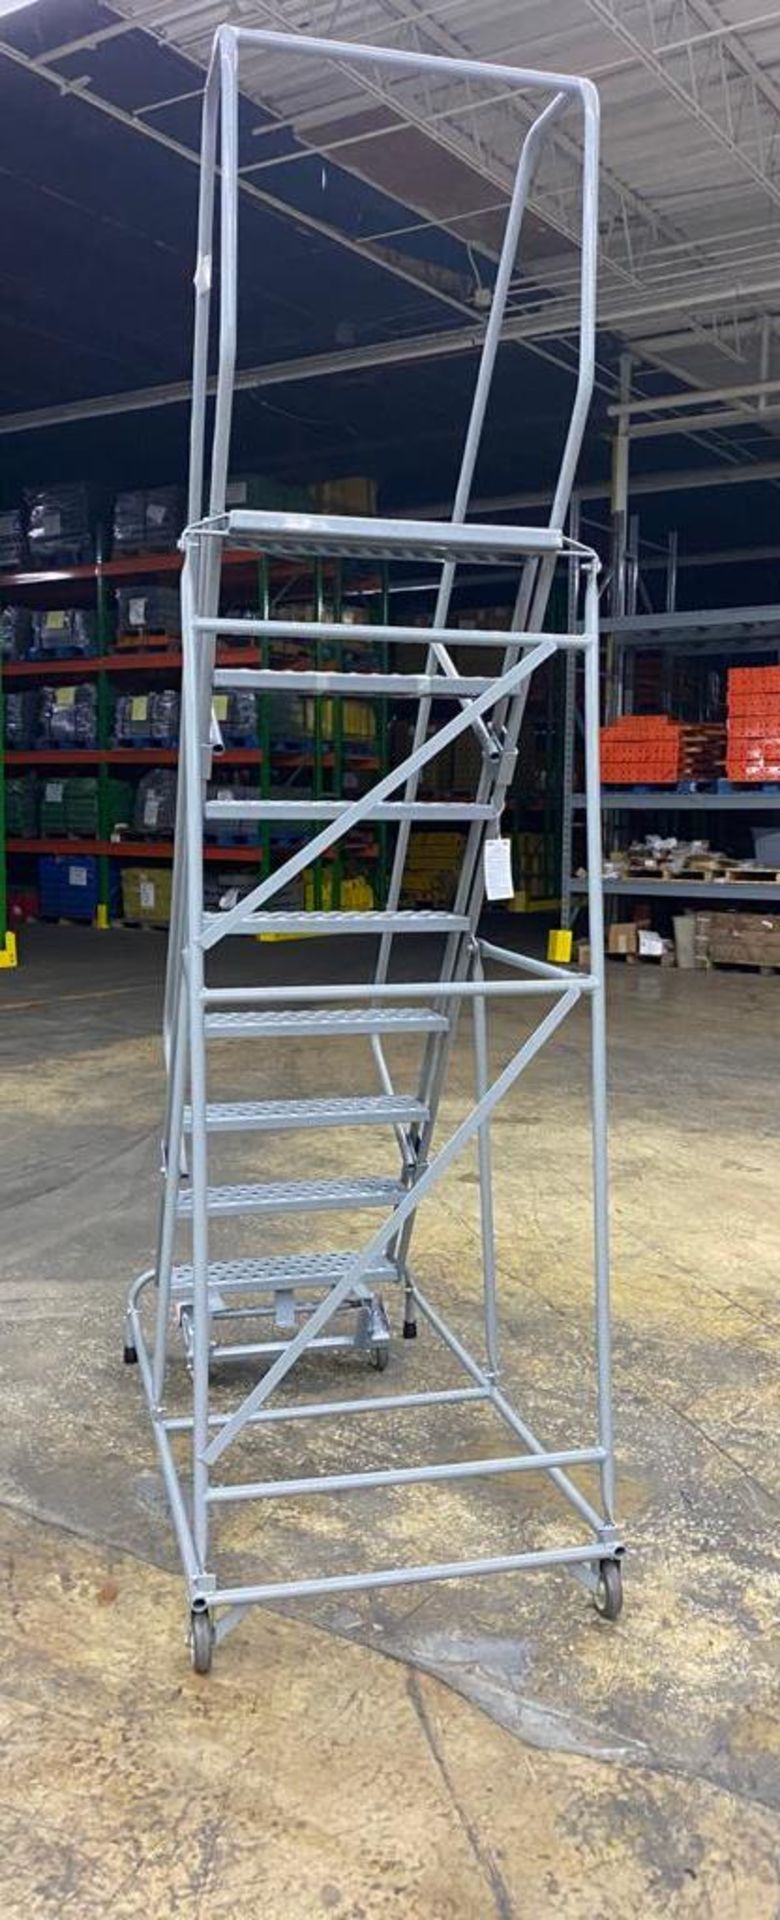 NEW 8 STEP ROLLING LADDER - Image 2 of 4